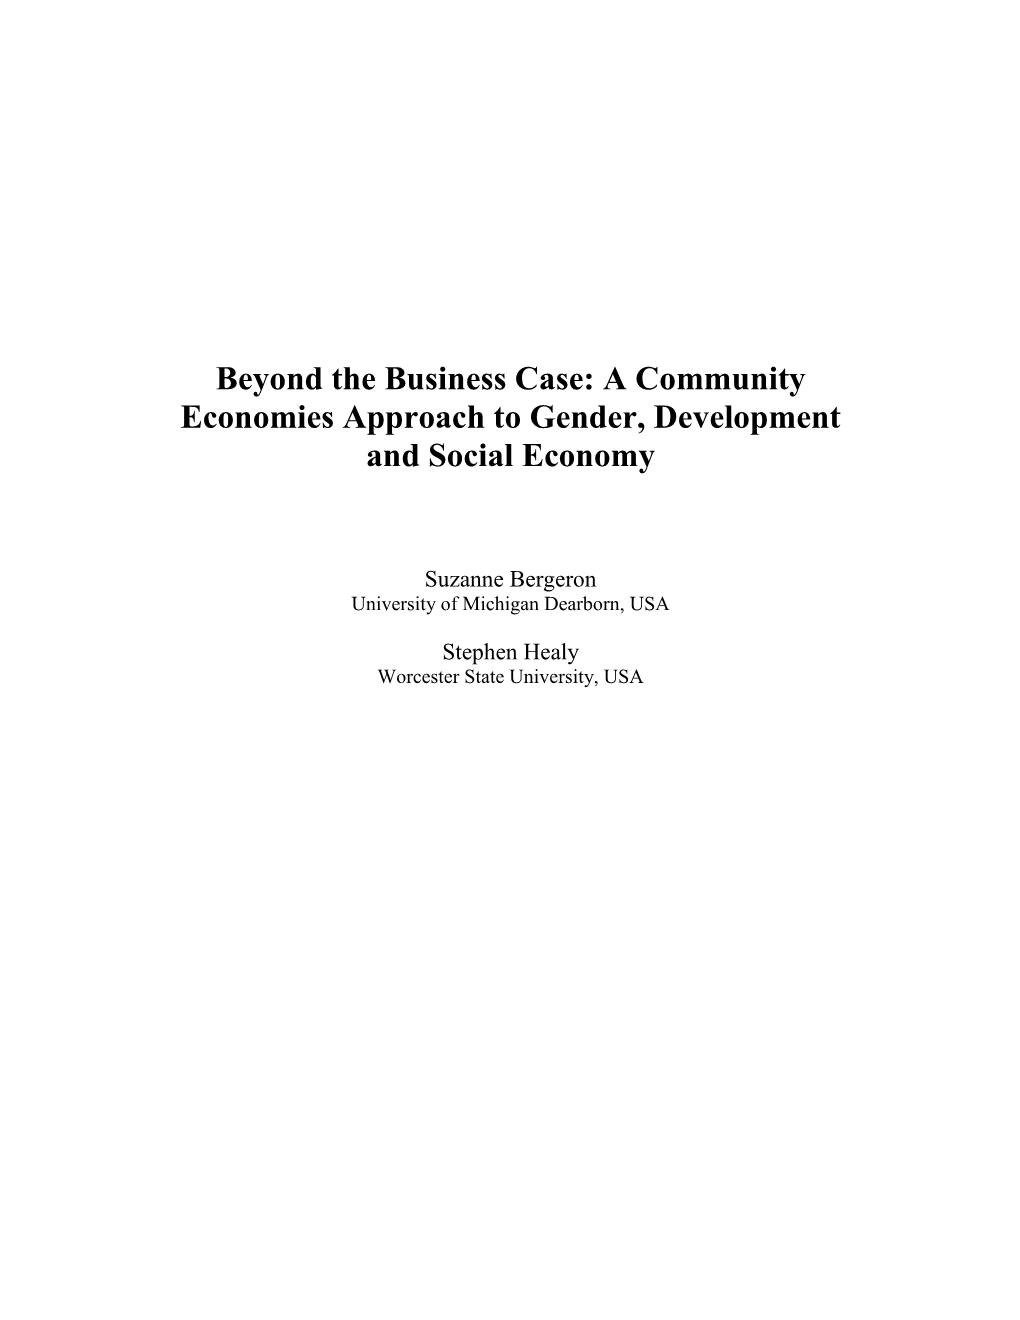 Beyond the Business Case: a Community Economies Approach to Gender, Development and Social Economy